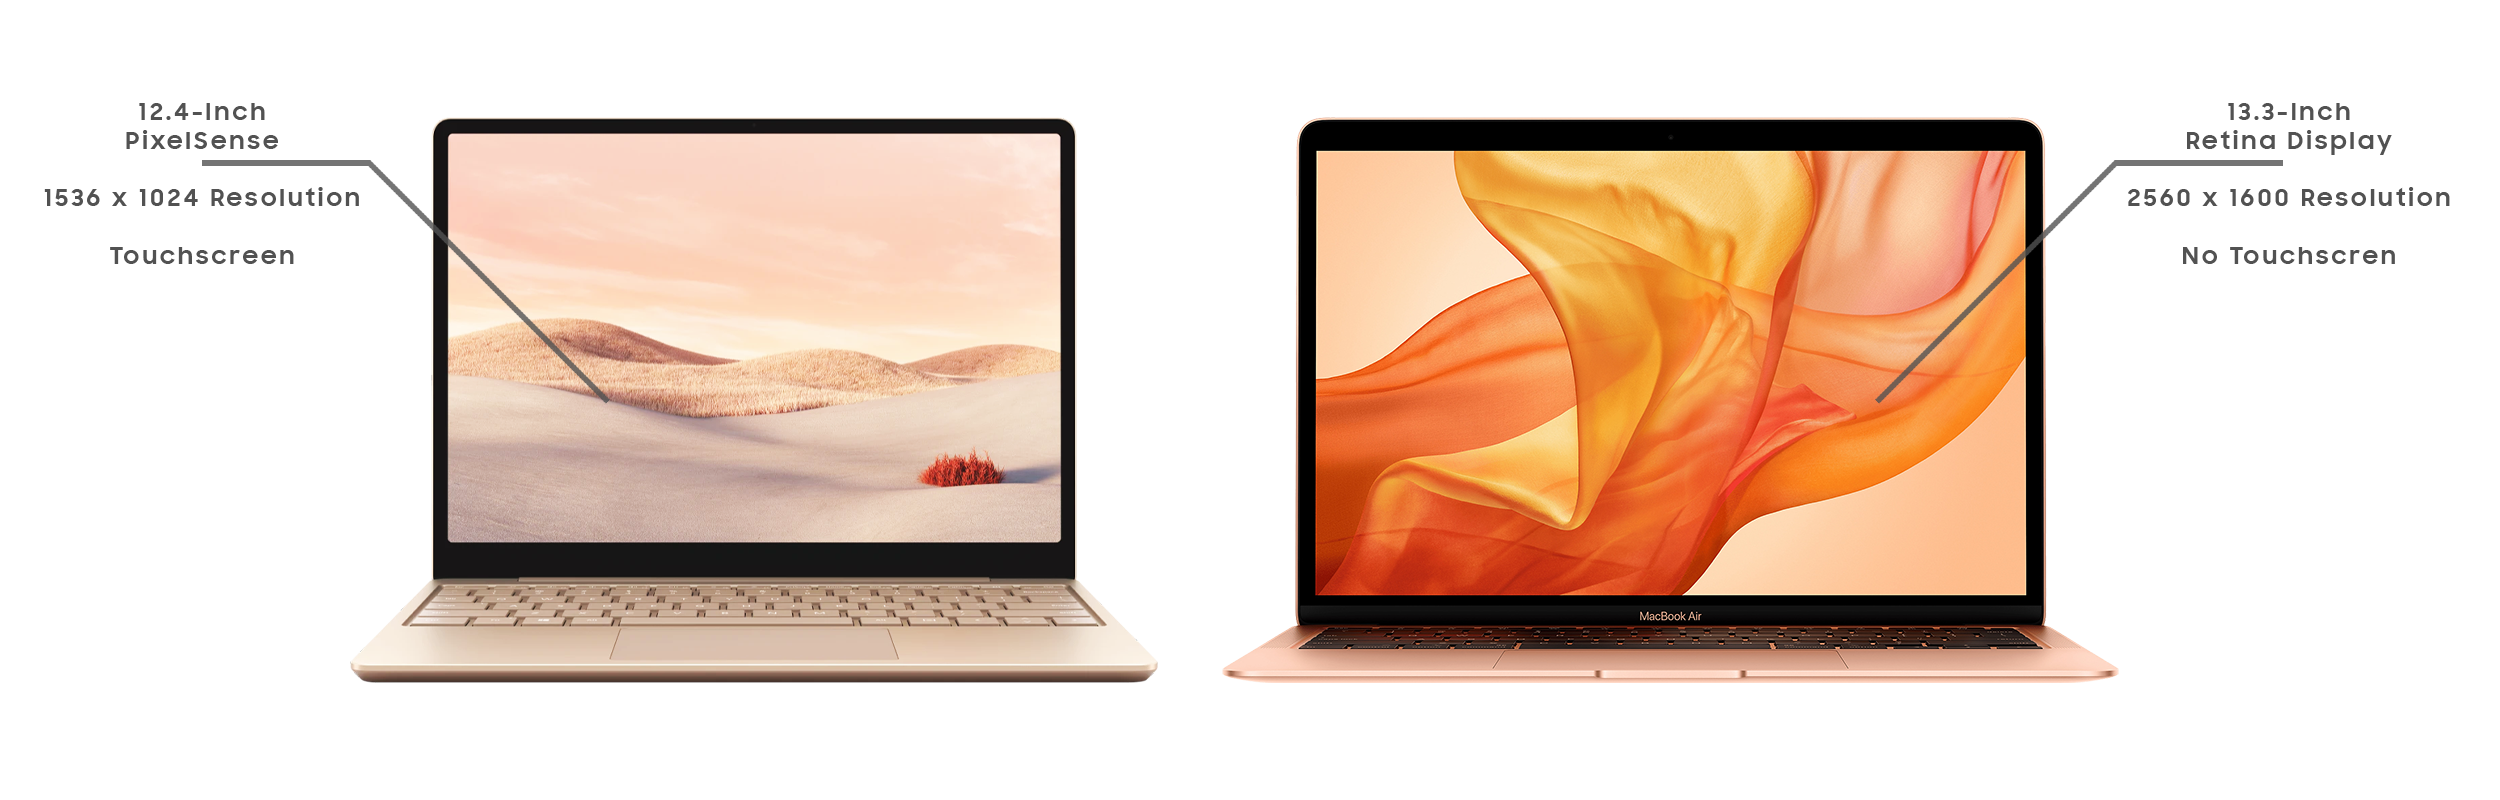 Display Comparison of MacBook Air 2020 vs Surface Laptop Go